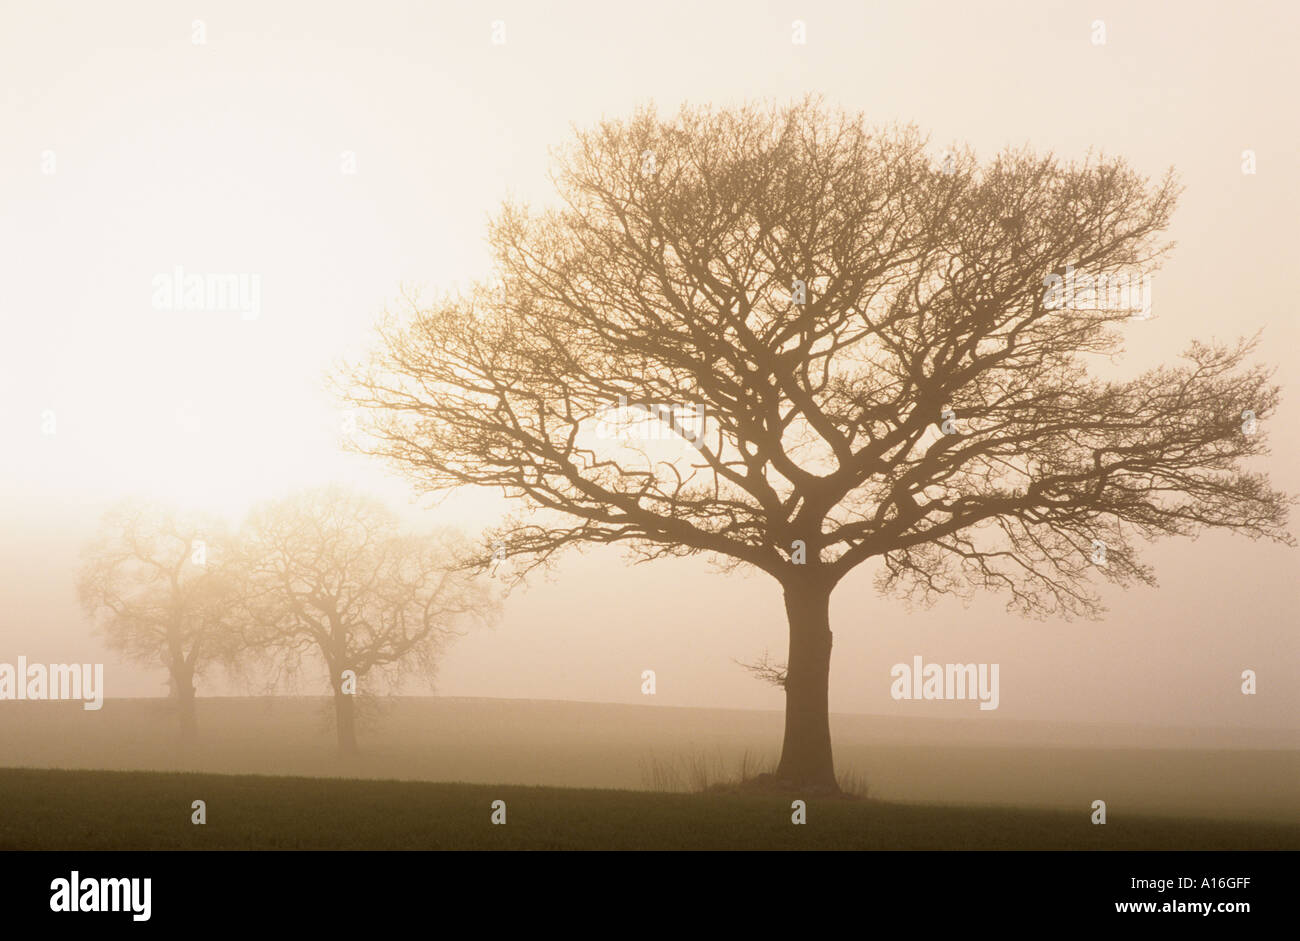 Mist and bare trees in a field Stock Photo